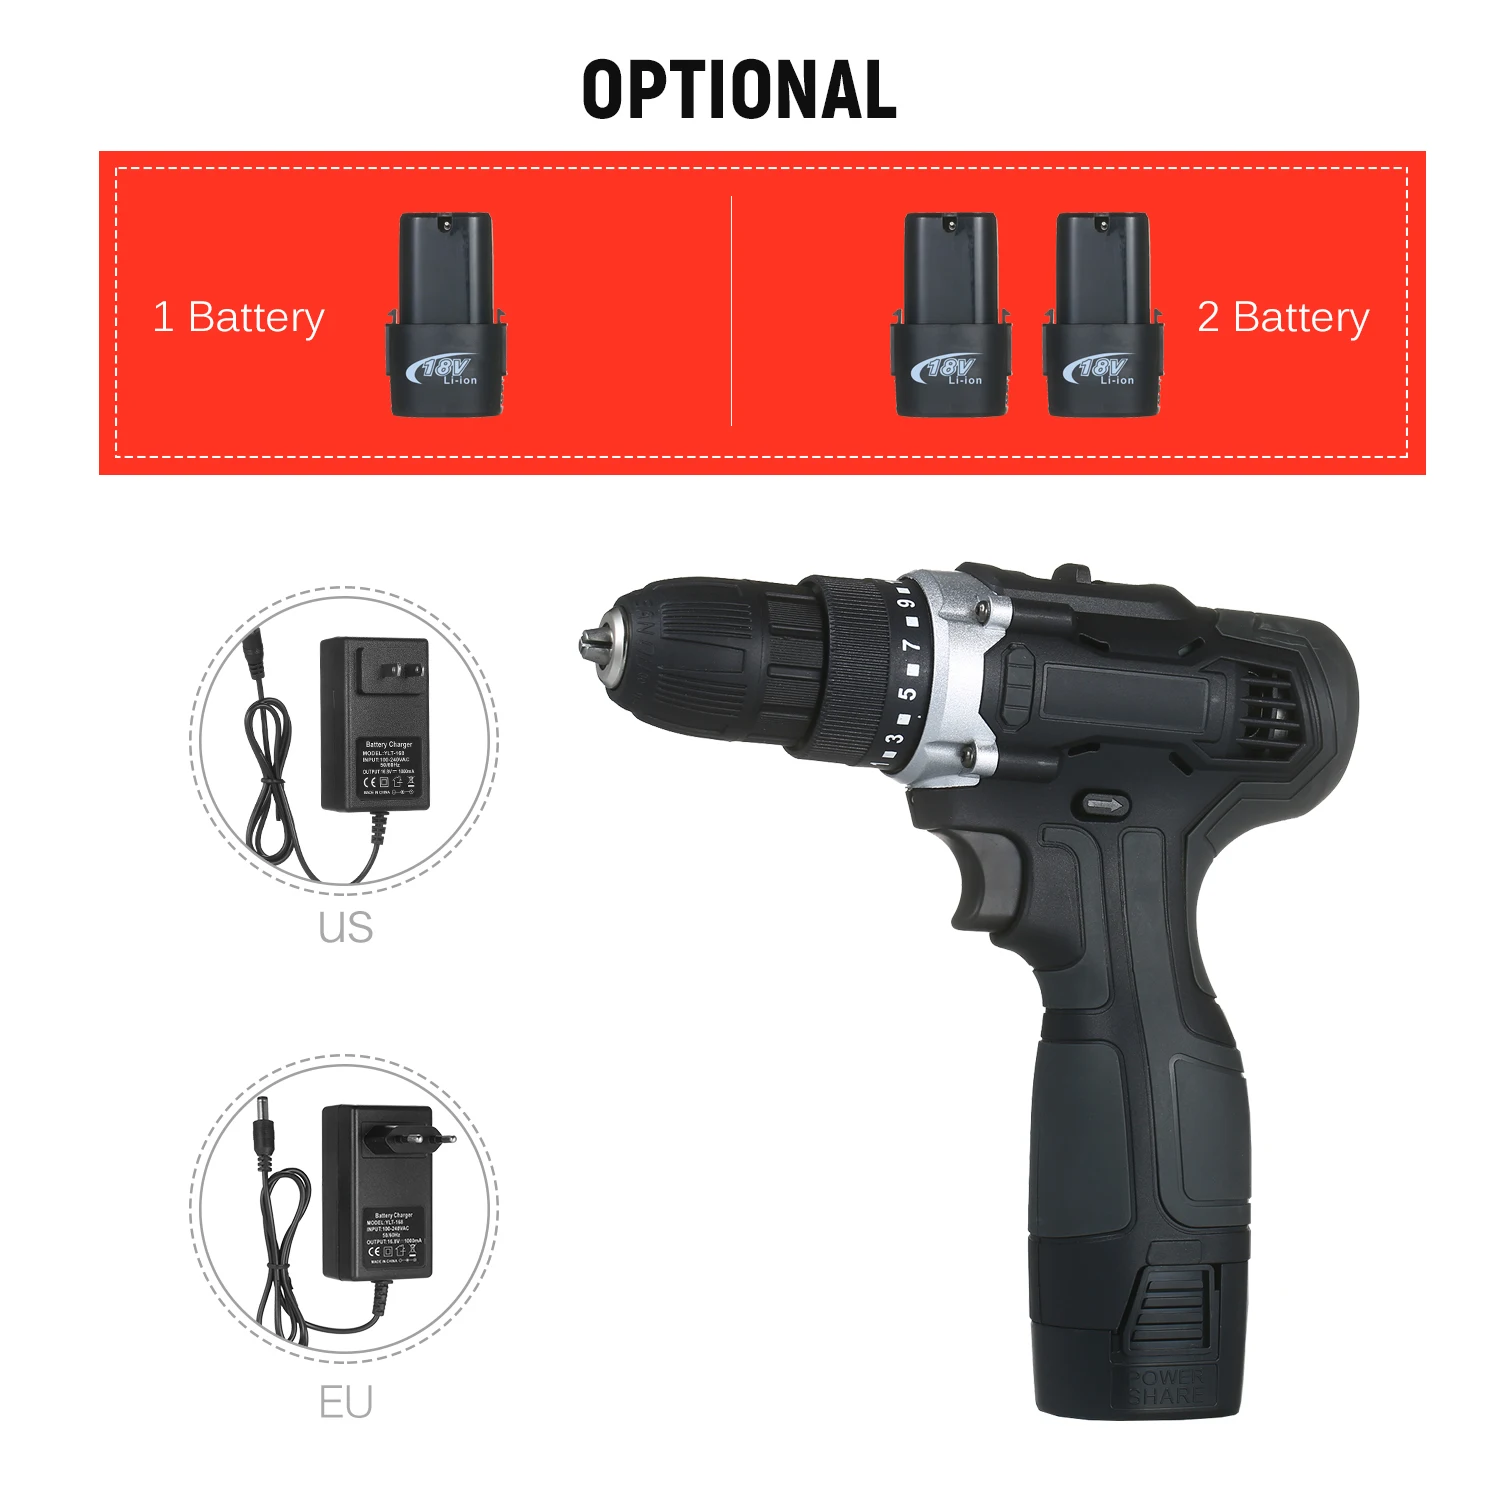 https://ae01.alicdn.com/kf/H4fd6cffe7dc5420c90aaa254667ca860W/18V-2-Speed-Cordless-Drill-Driver-2-Batteries-Fast-Charger-50Nm-Torque-Variable-Speed-Compact-15.jpg